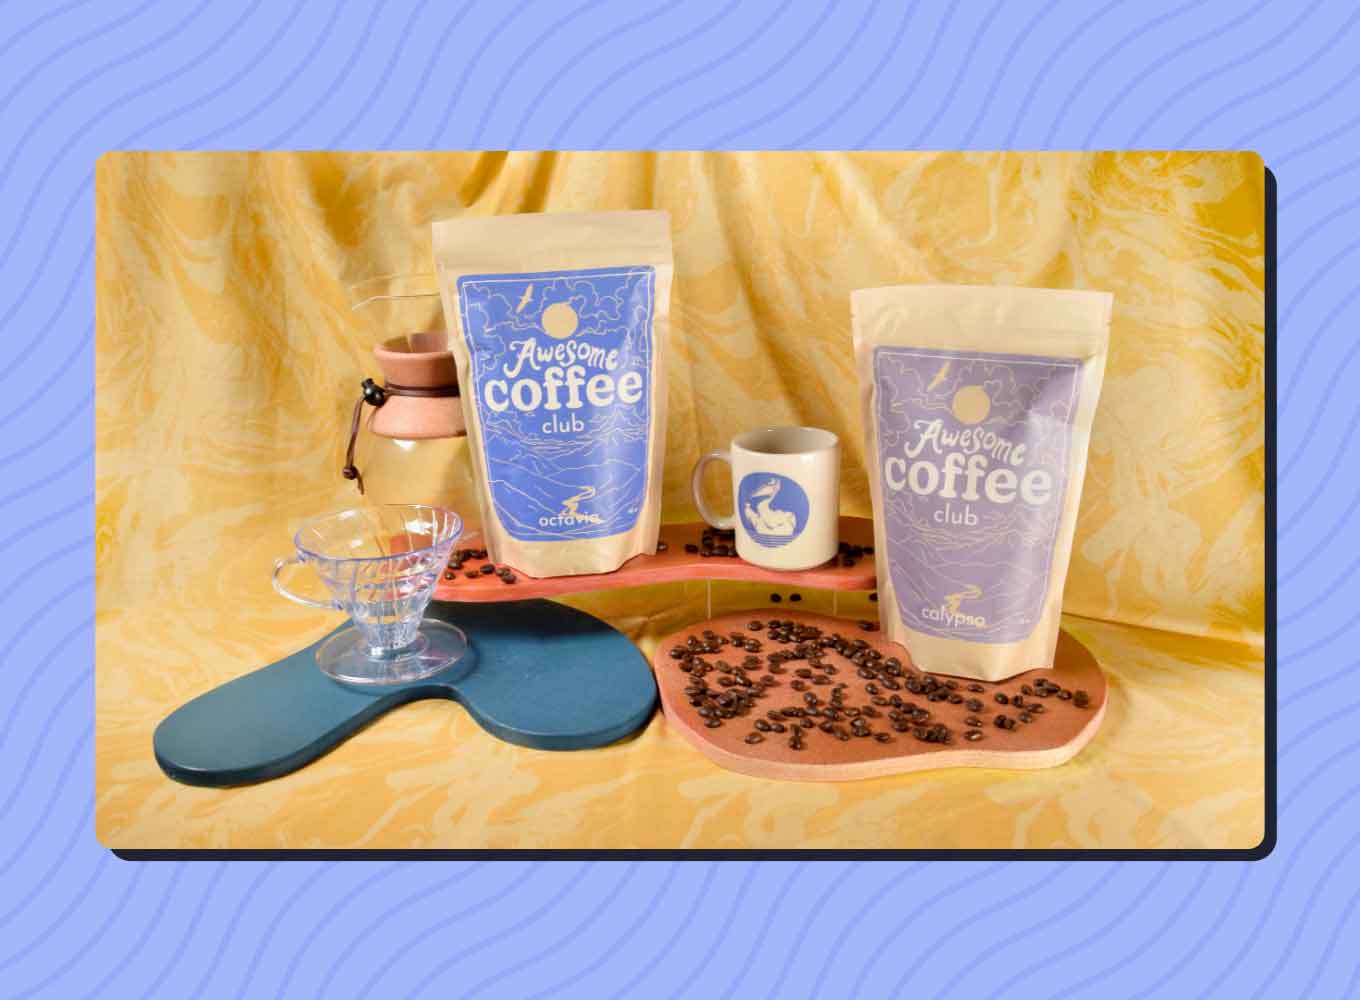 Awesome Coffee Club products